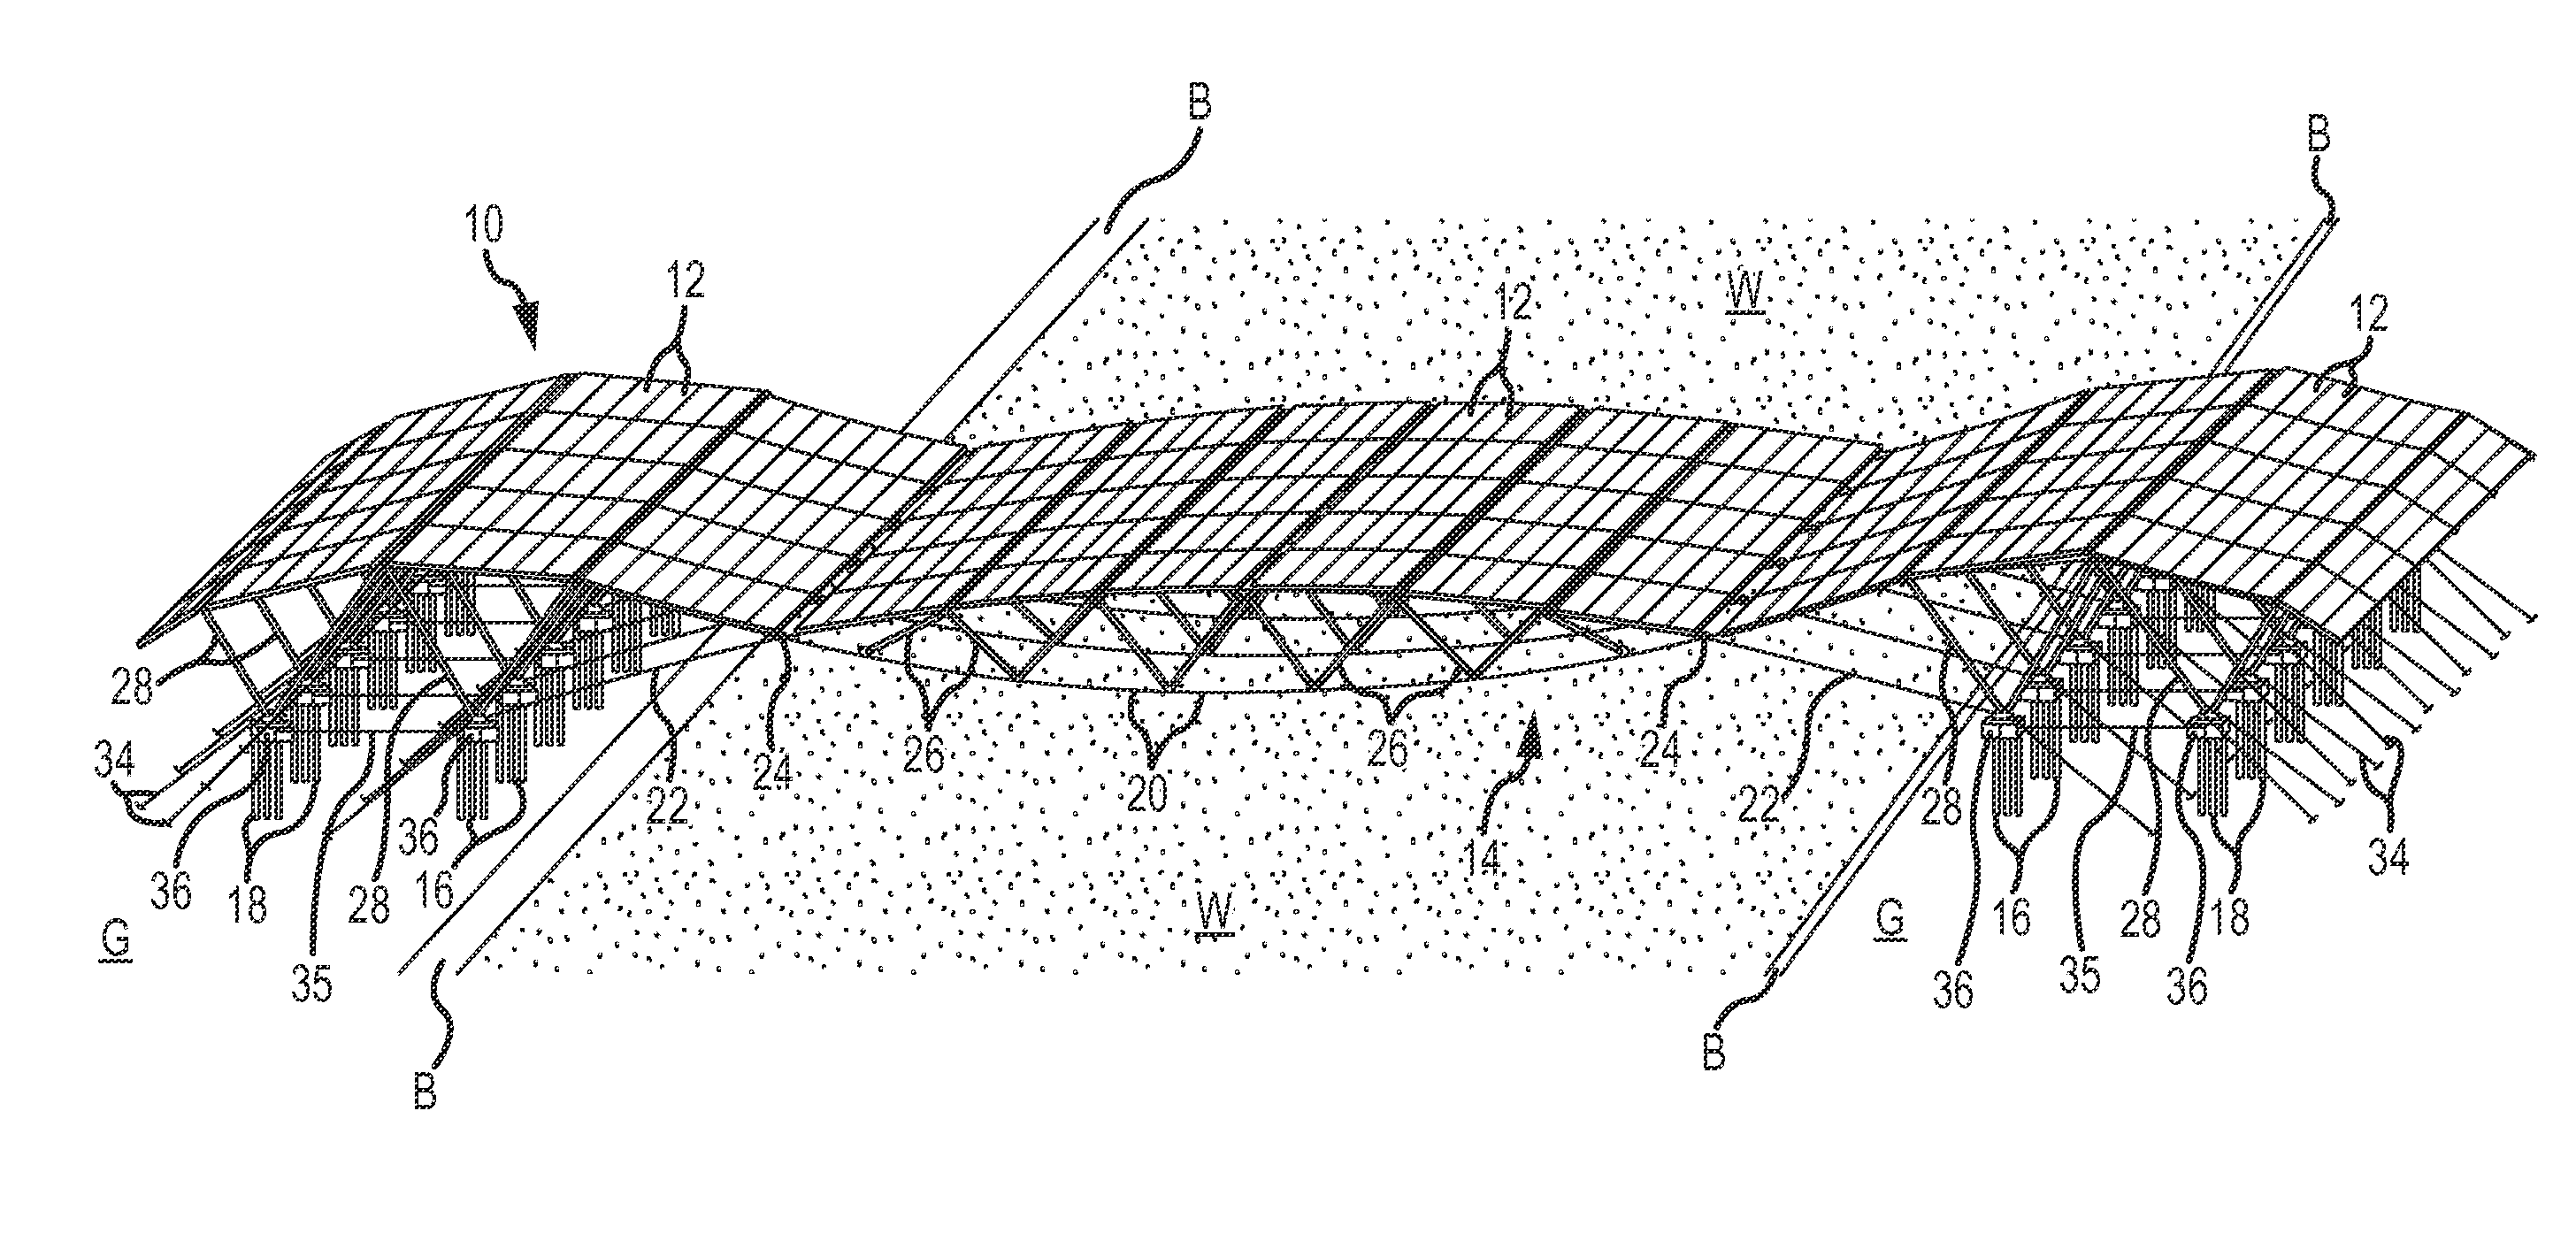 Solar array system for covering a body of water